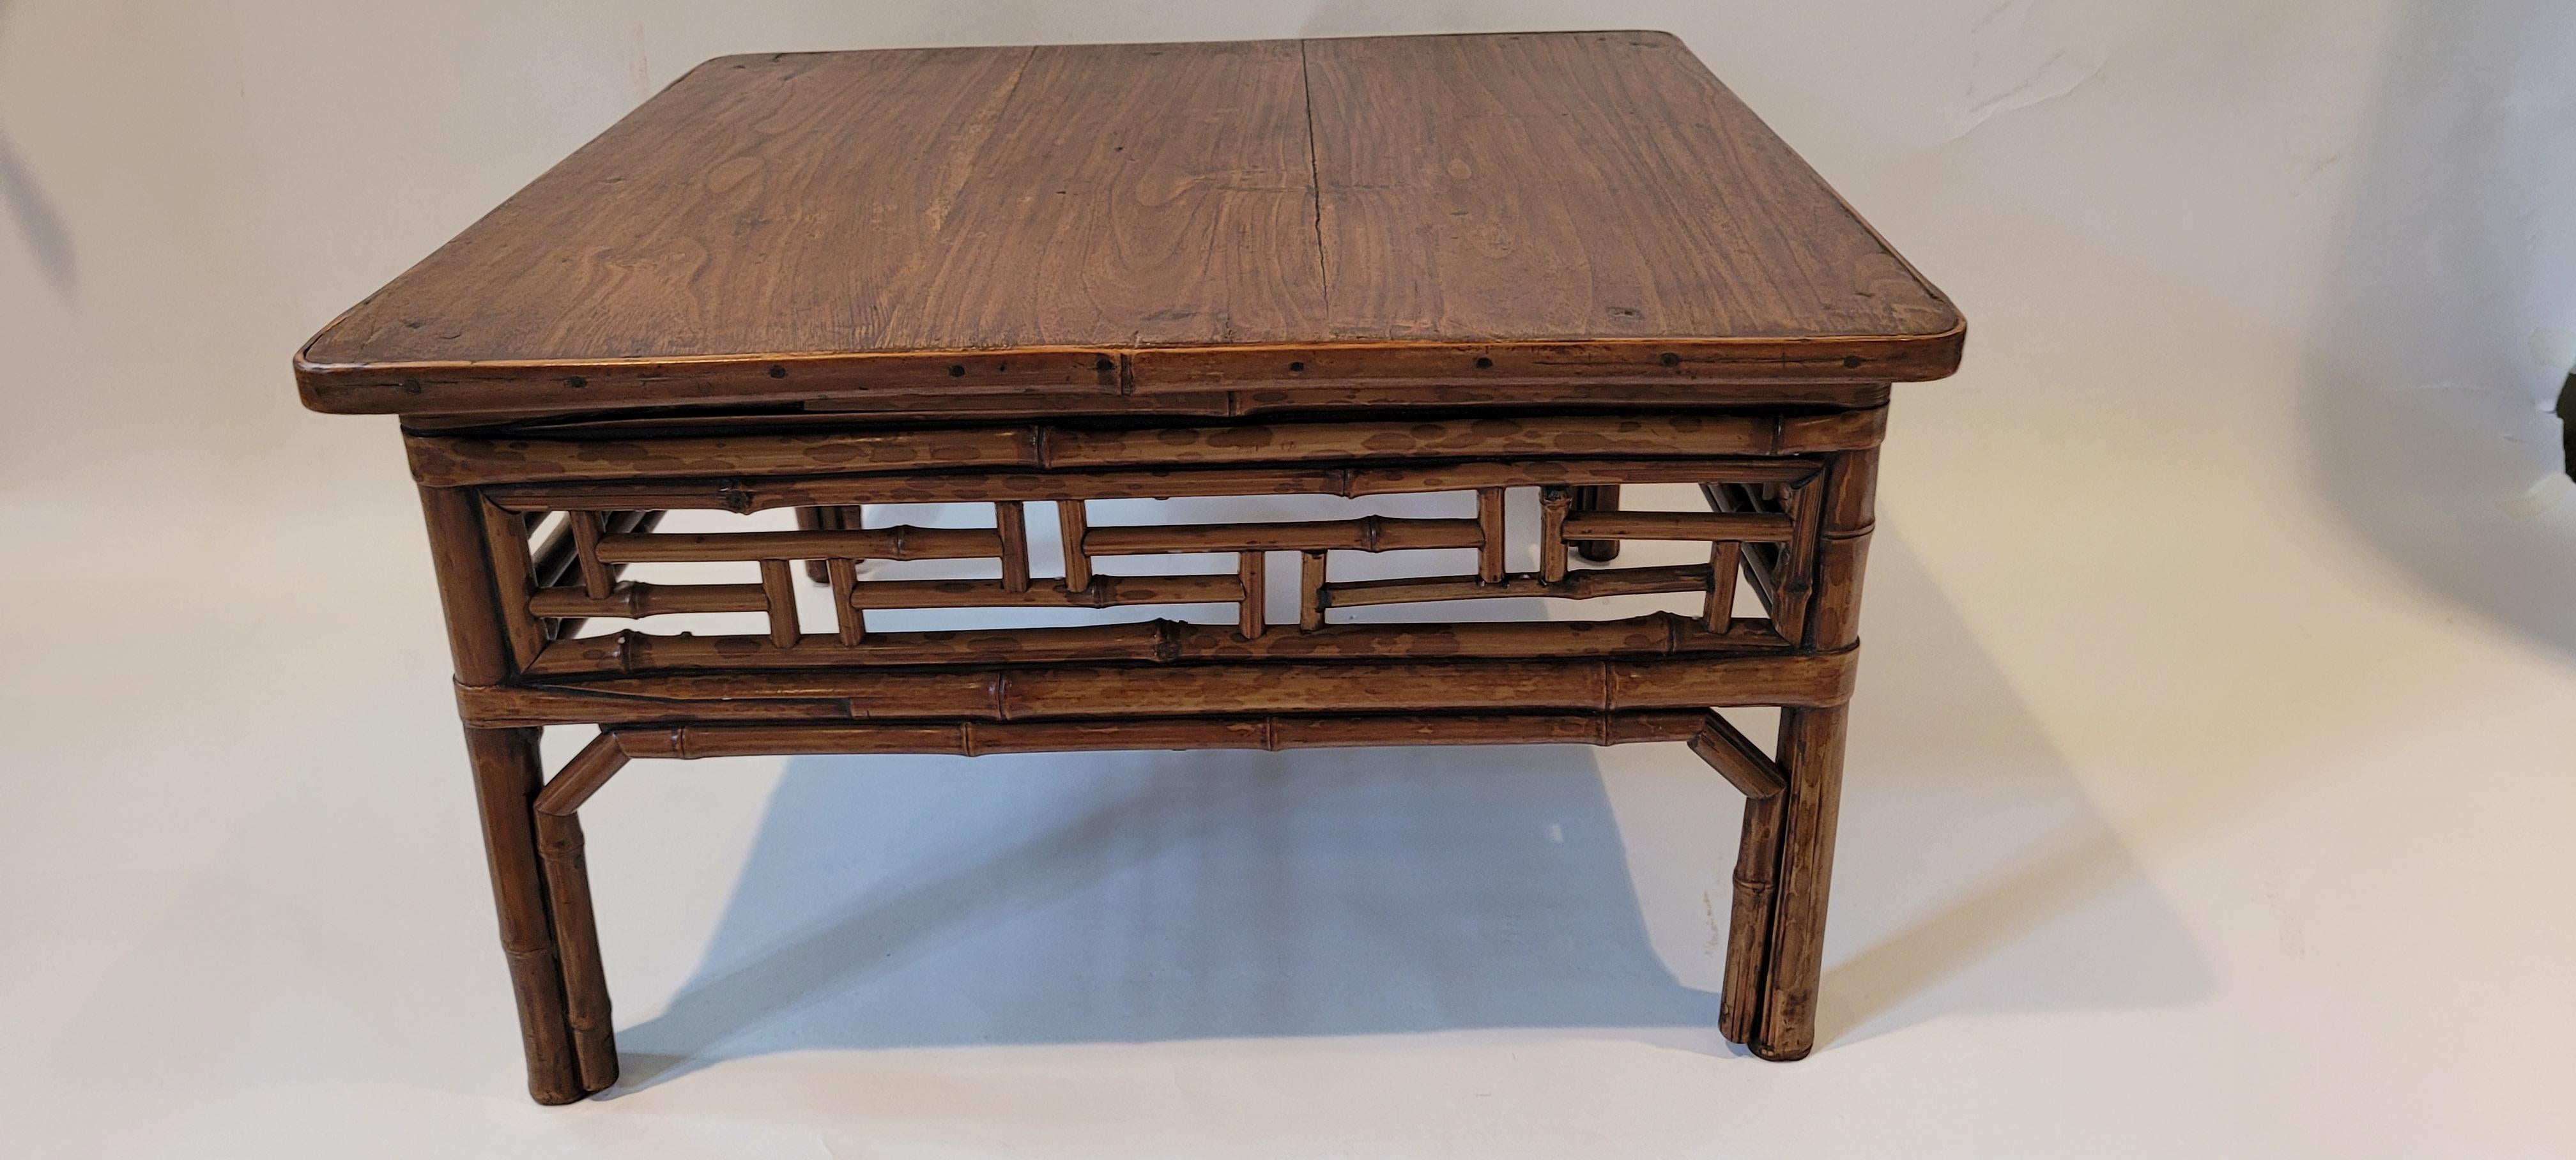 Bamboo Low Table 13H x 23W x 22.5D
A square low table with geometric fretwork decoration. The legs are held together with double wrapped around stretchers. These stretchers also help to strengthen the structure of the table. In between the legs are